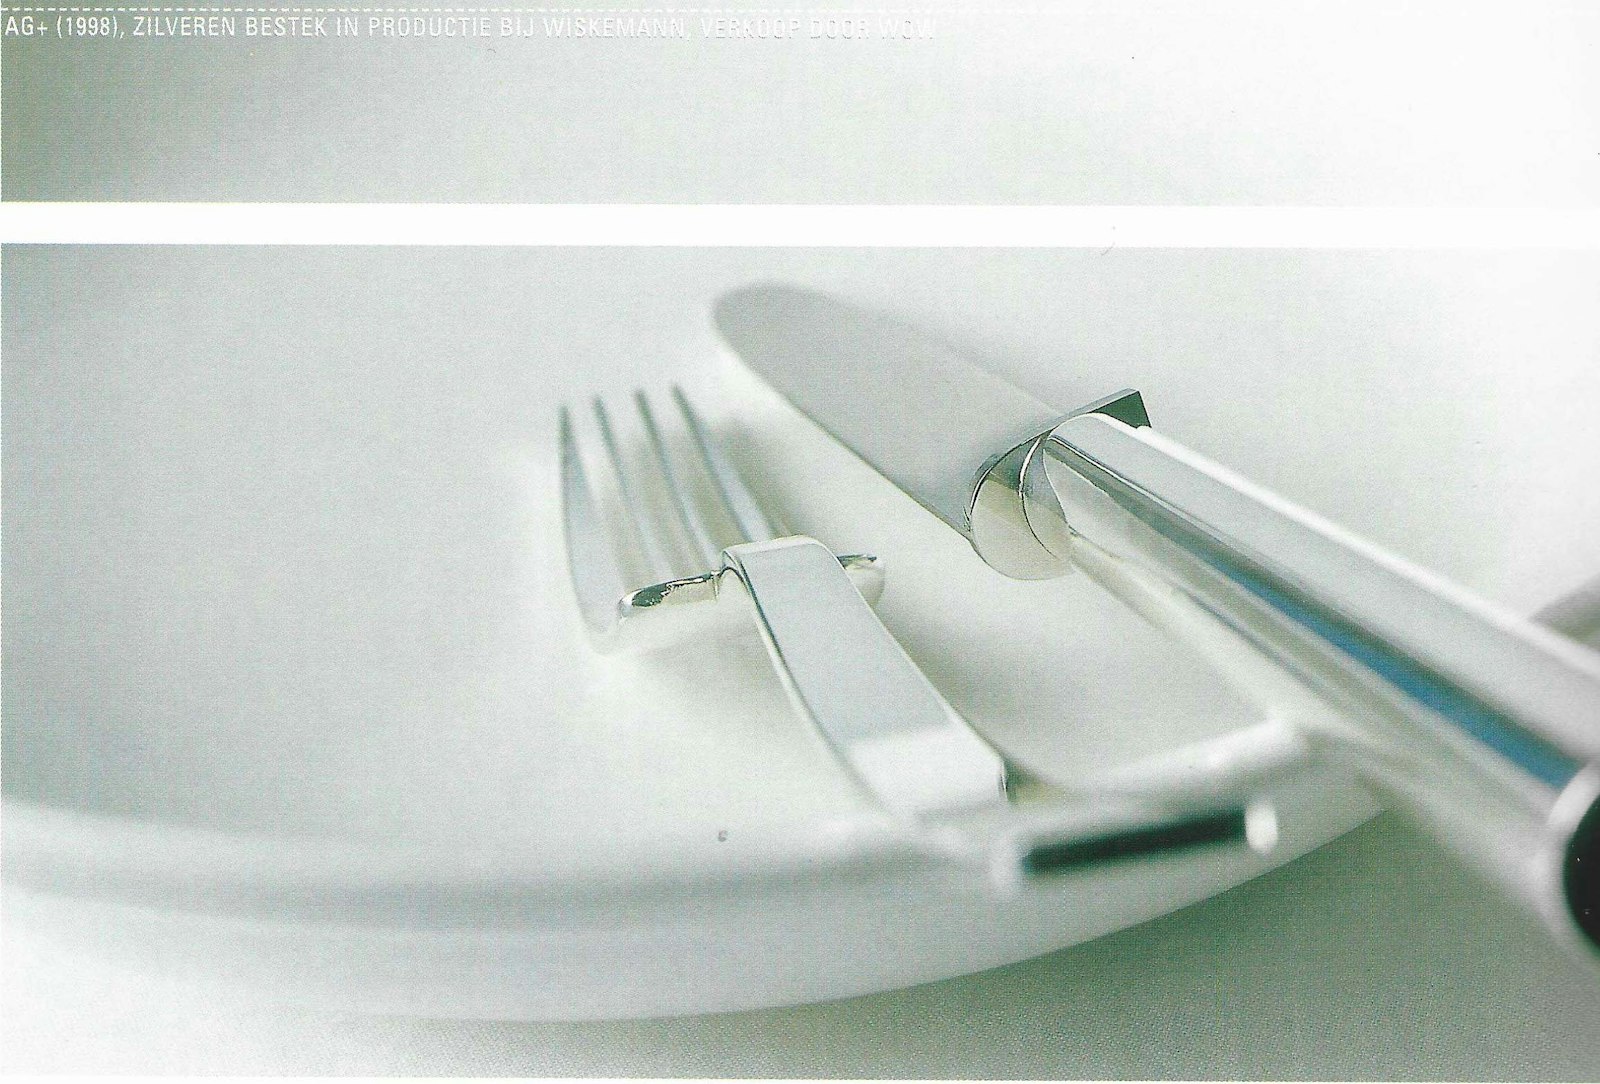 'AG+' (1998), silver cutlery, production by Wiskemann, sale by Wow